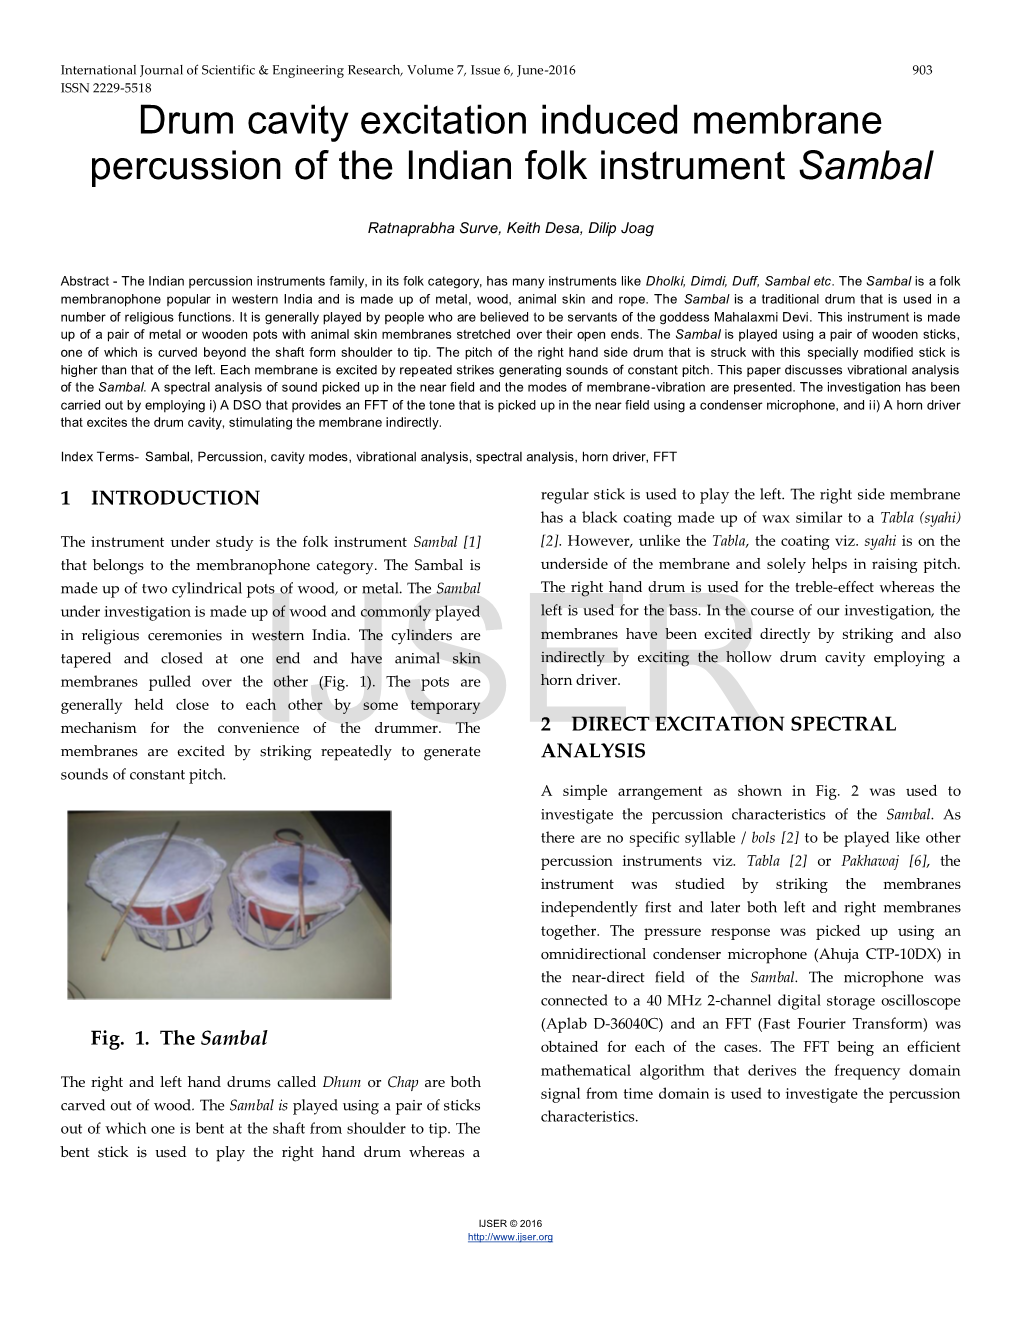 Drum Cavity Excitation Induced Membrane Percussion of the Indian Folk Instrument Sambal